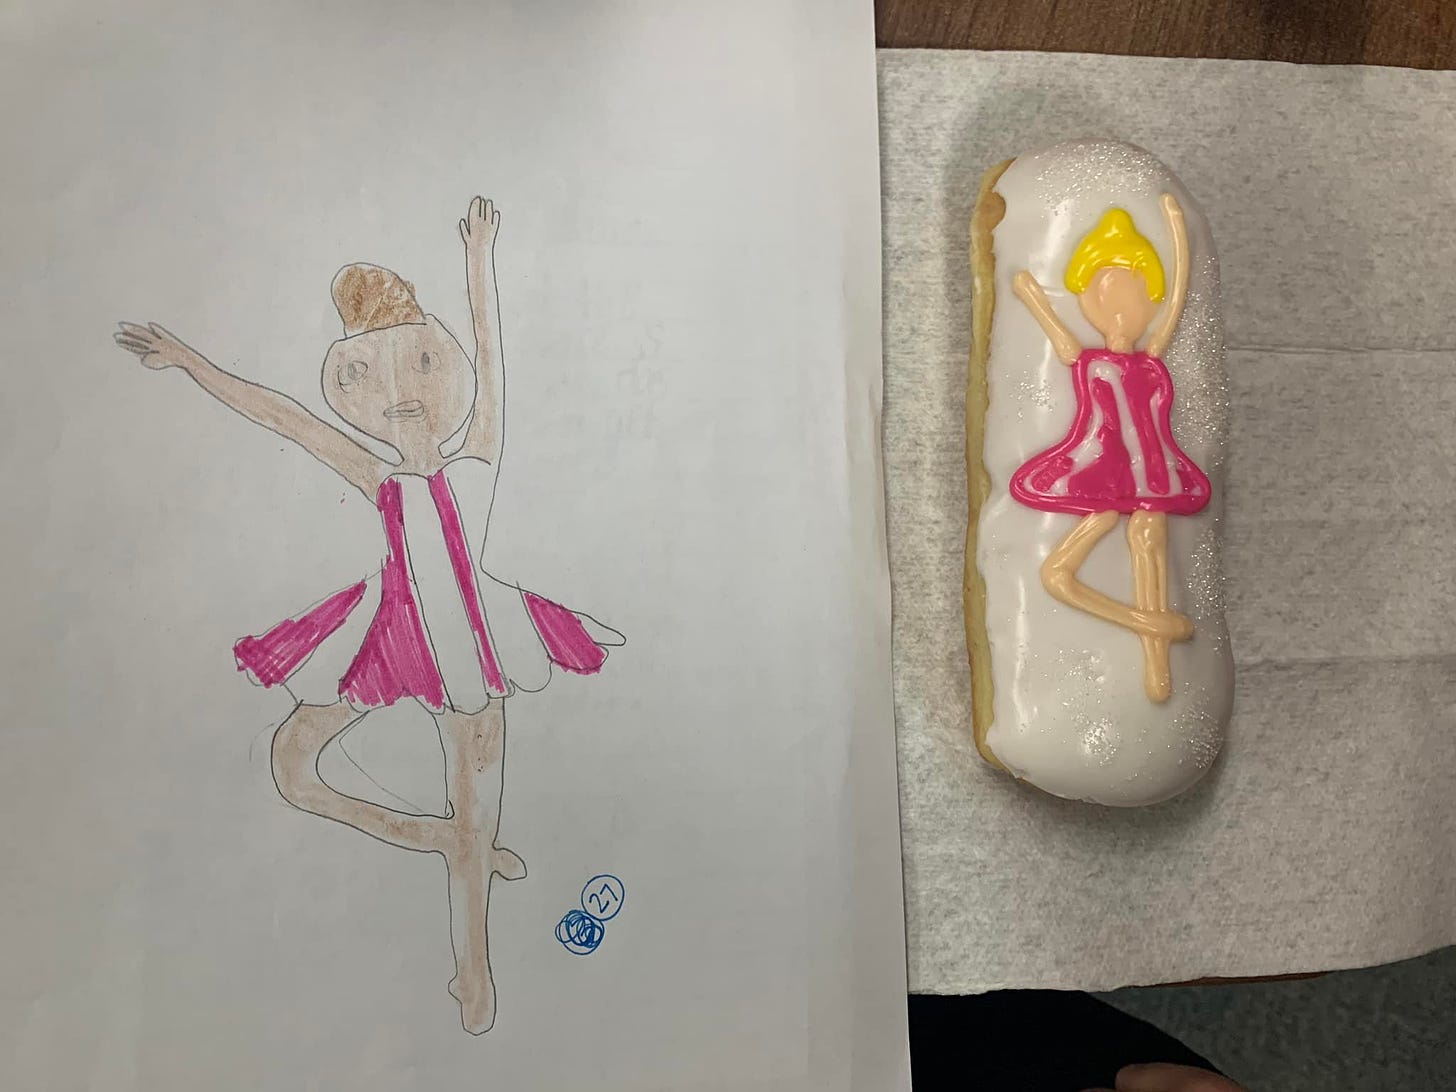 A drawing of a ballerina and a matching donut